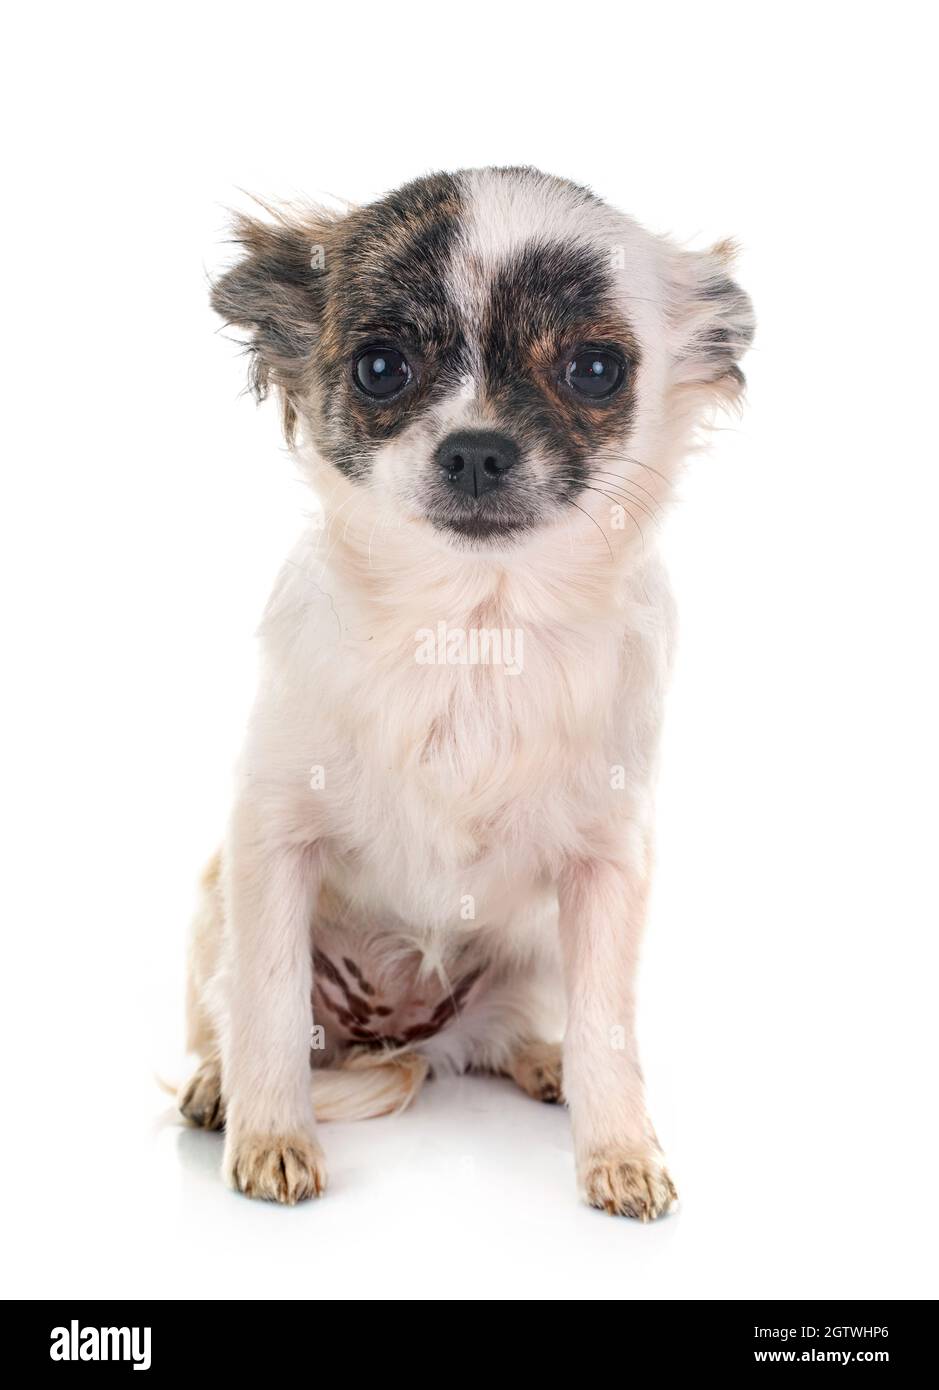 Portrait Of Cute Dog Sitting Over White Background Stock Photo